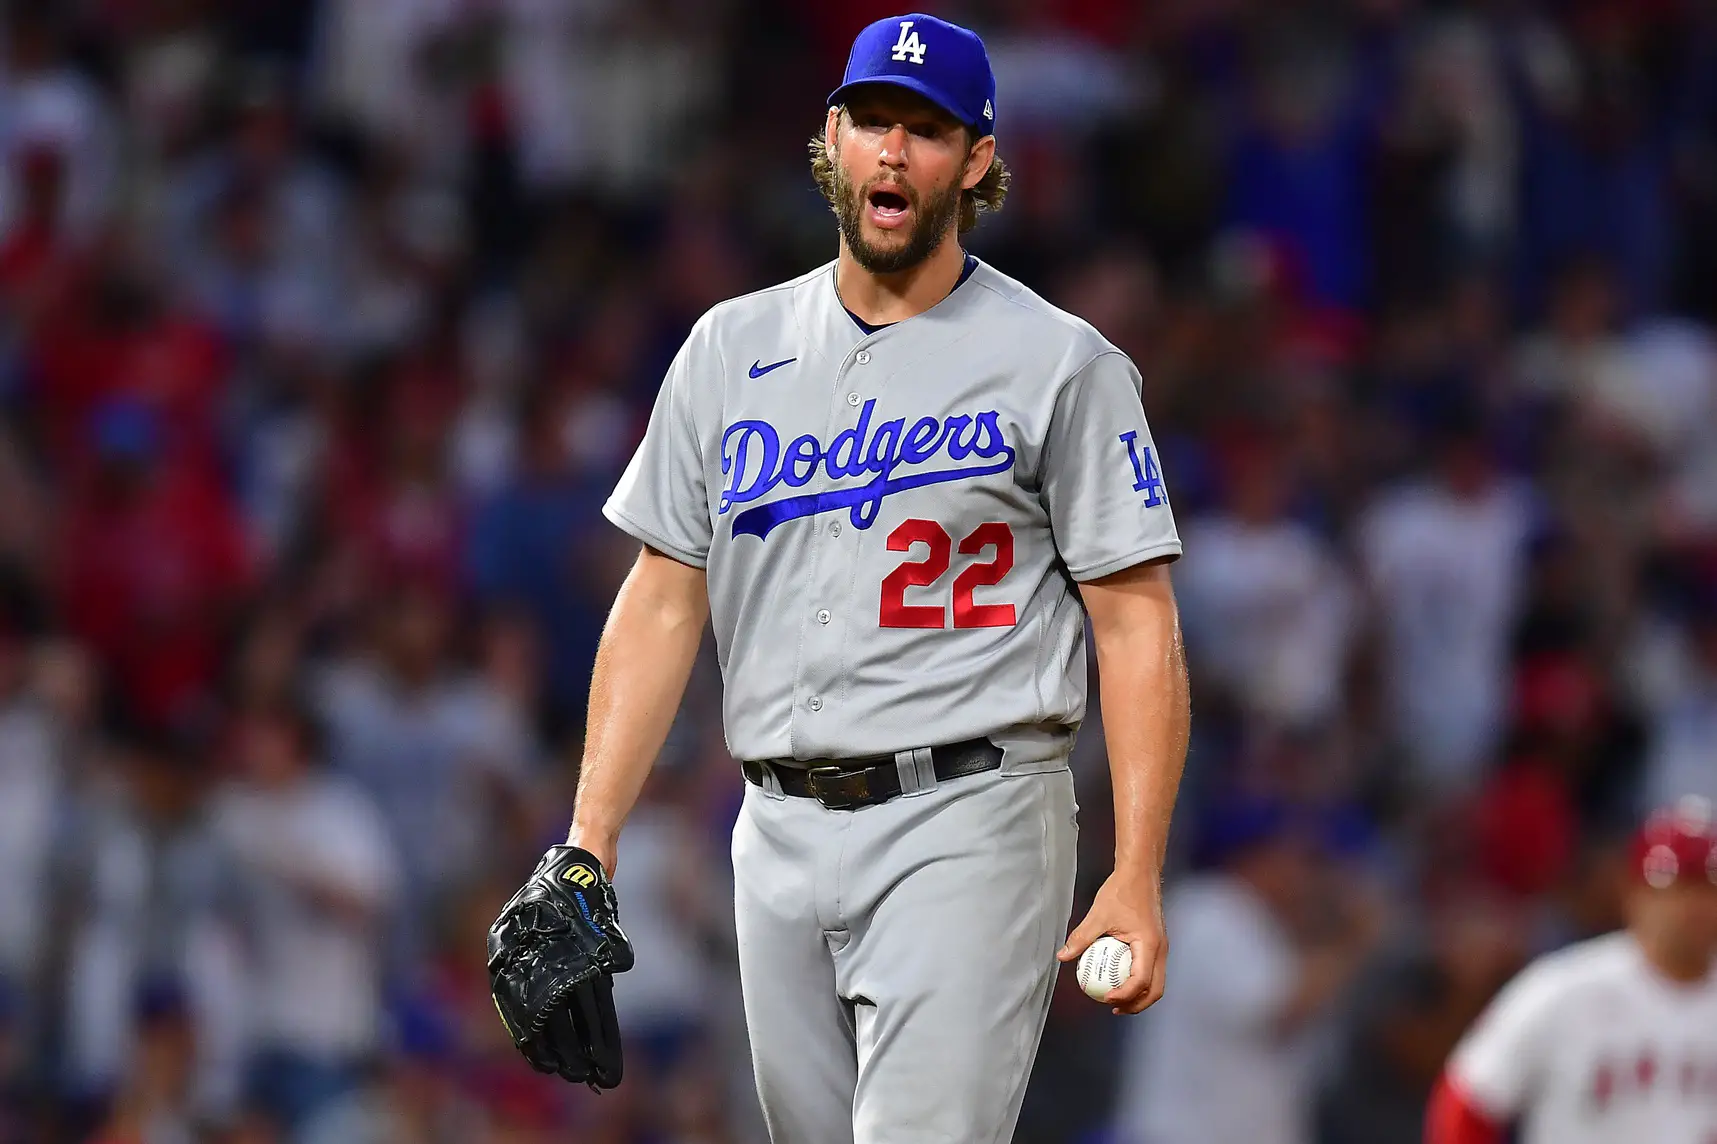 Dodgers News: Clayton Kershaw Officially Placed on Injured List for First Time This Season